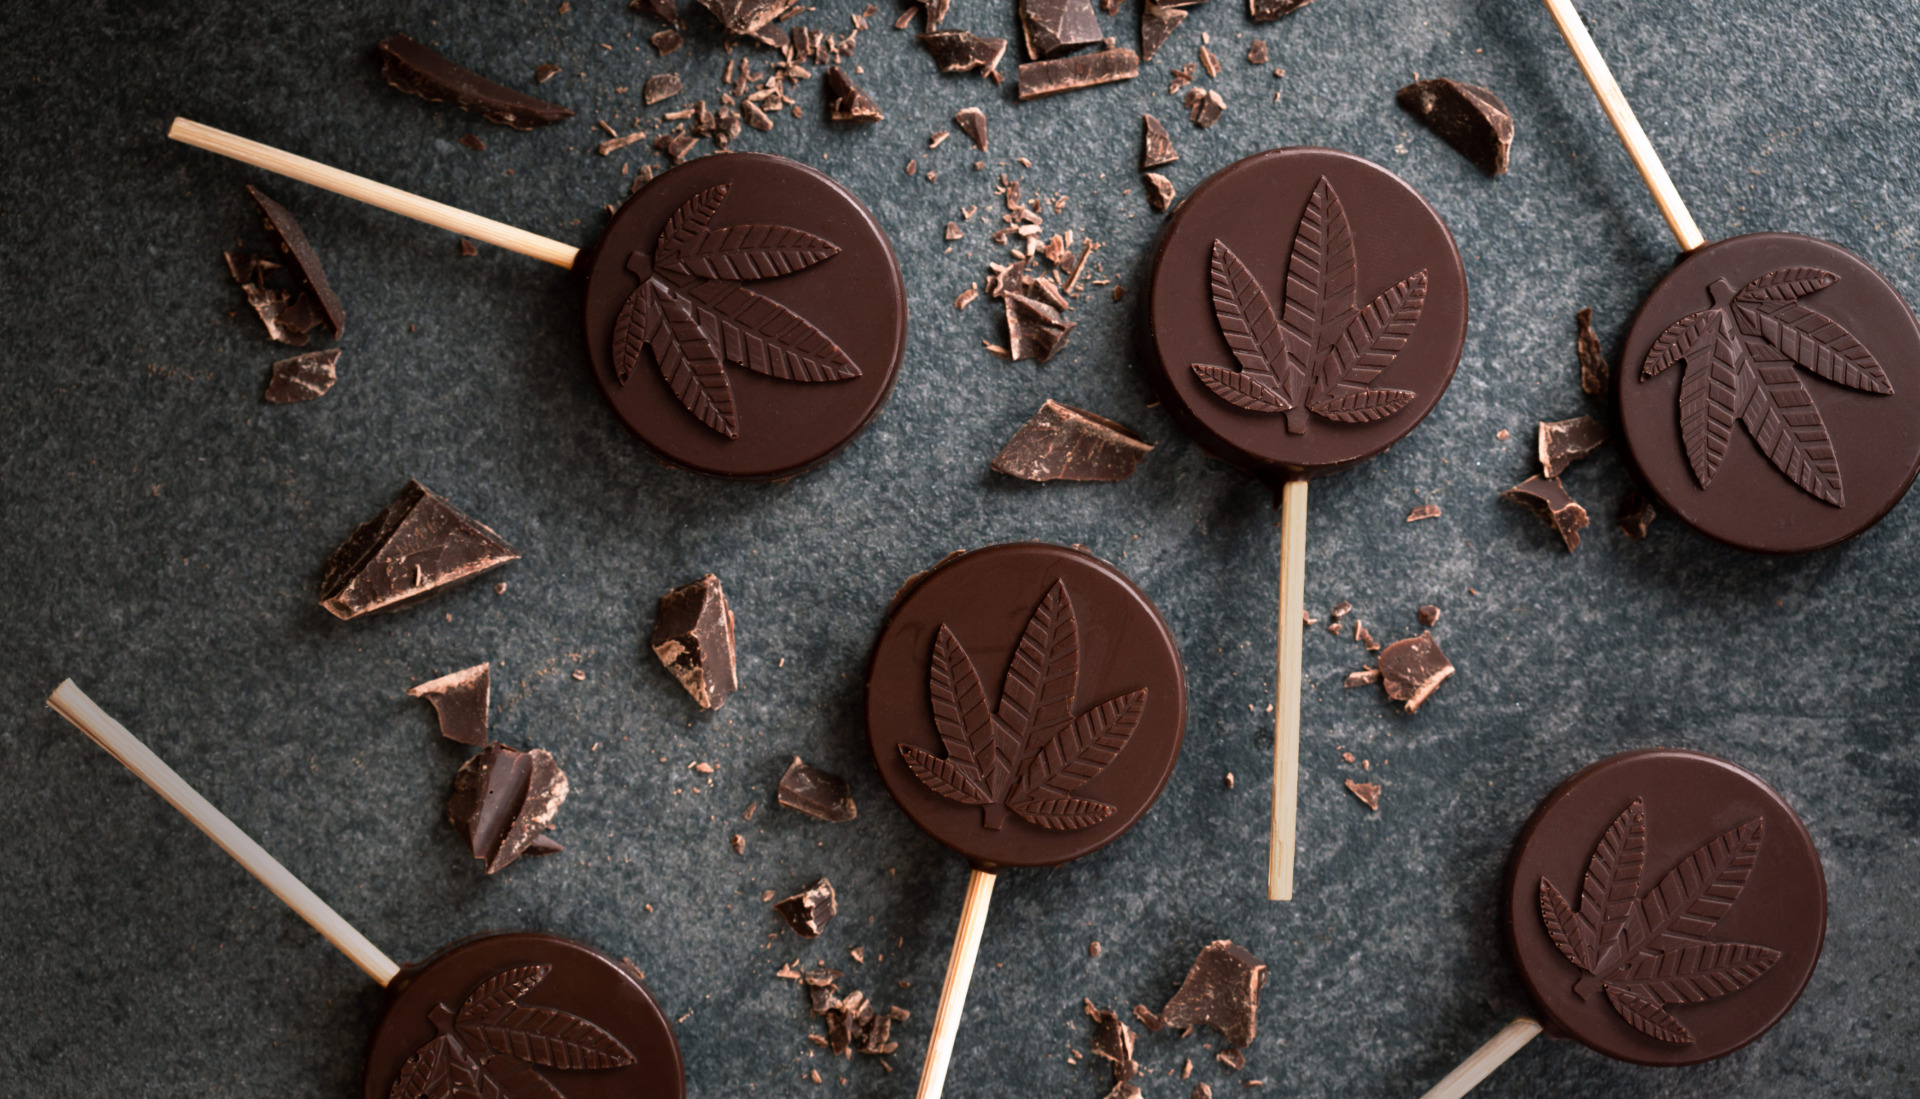 Cannabis-infused chocolate lollipops